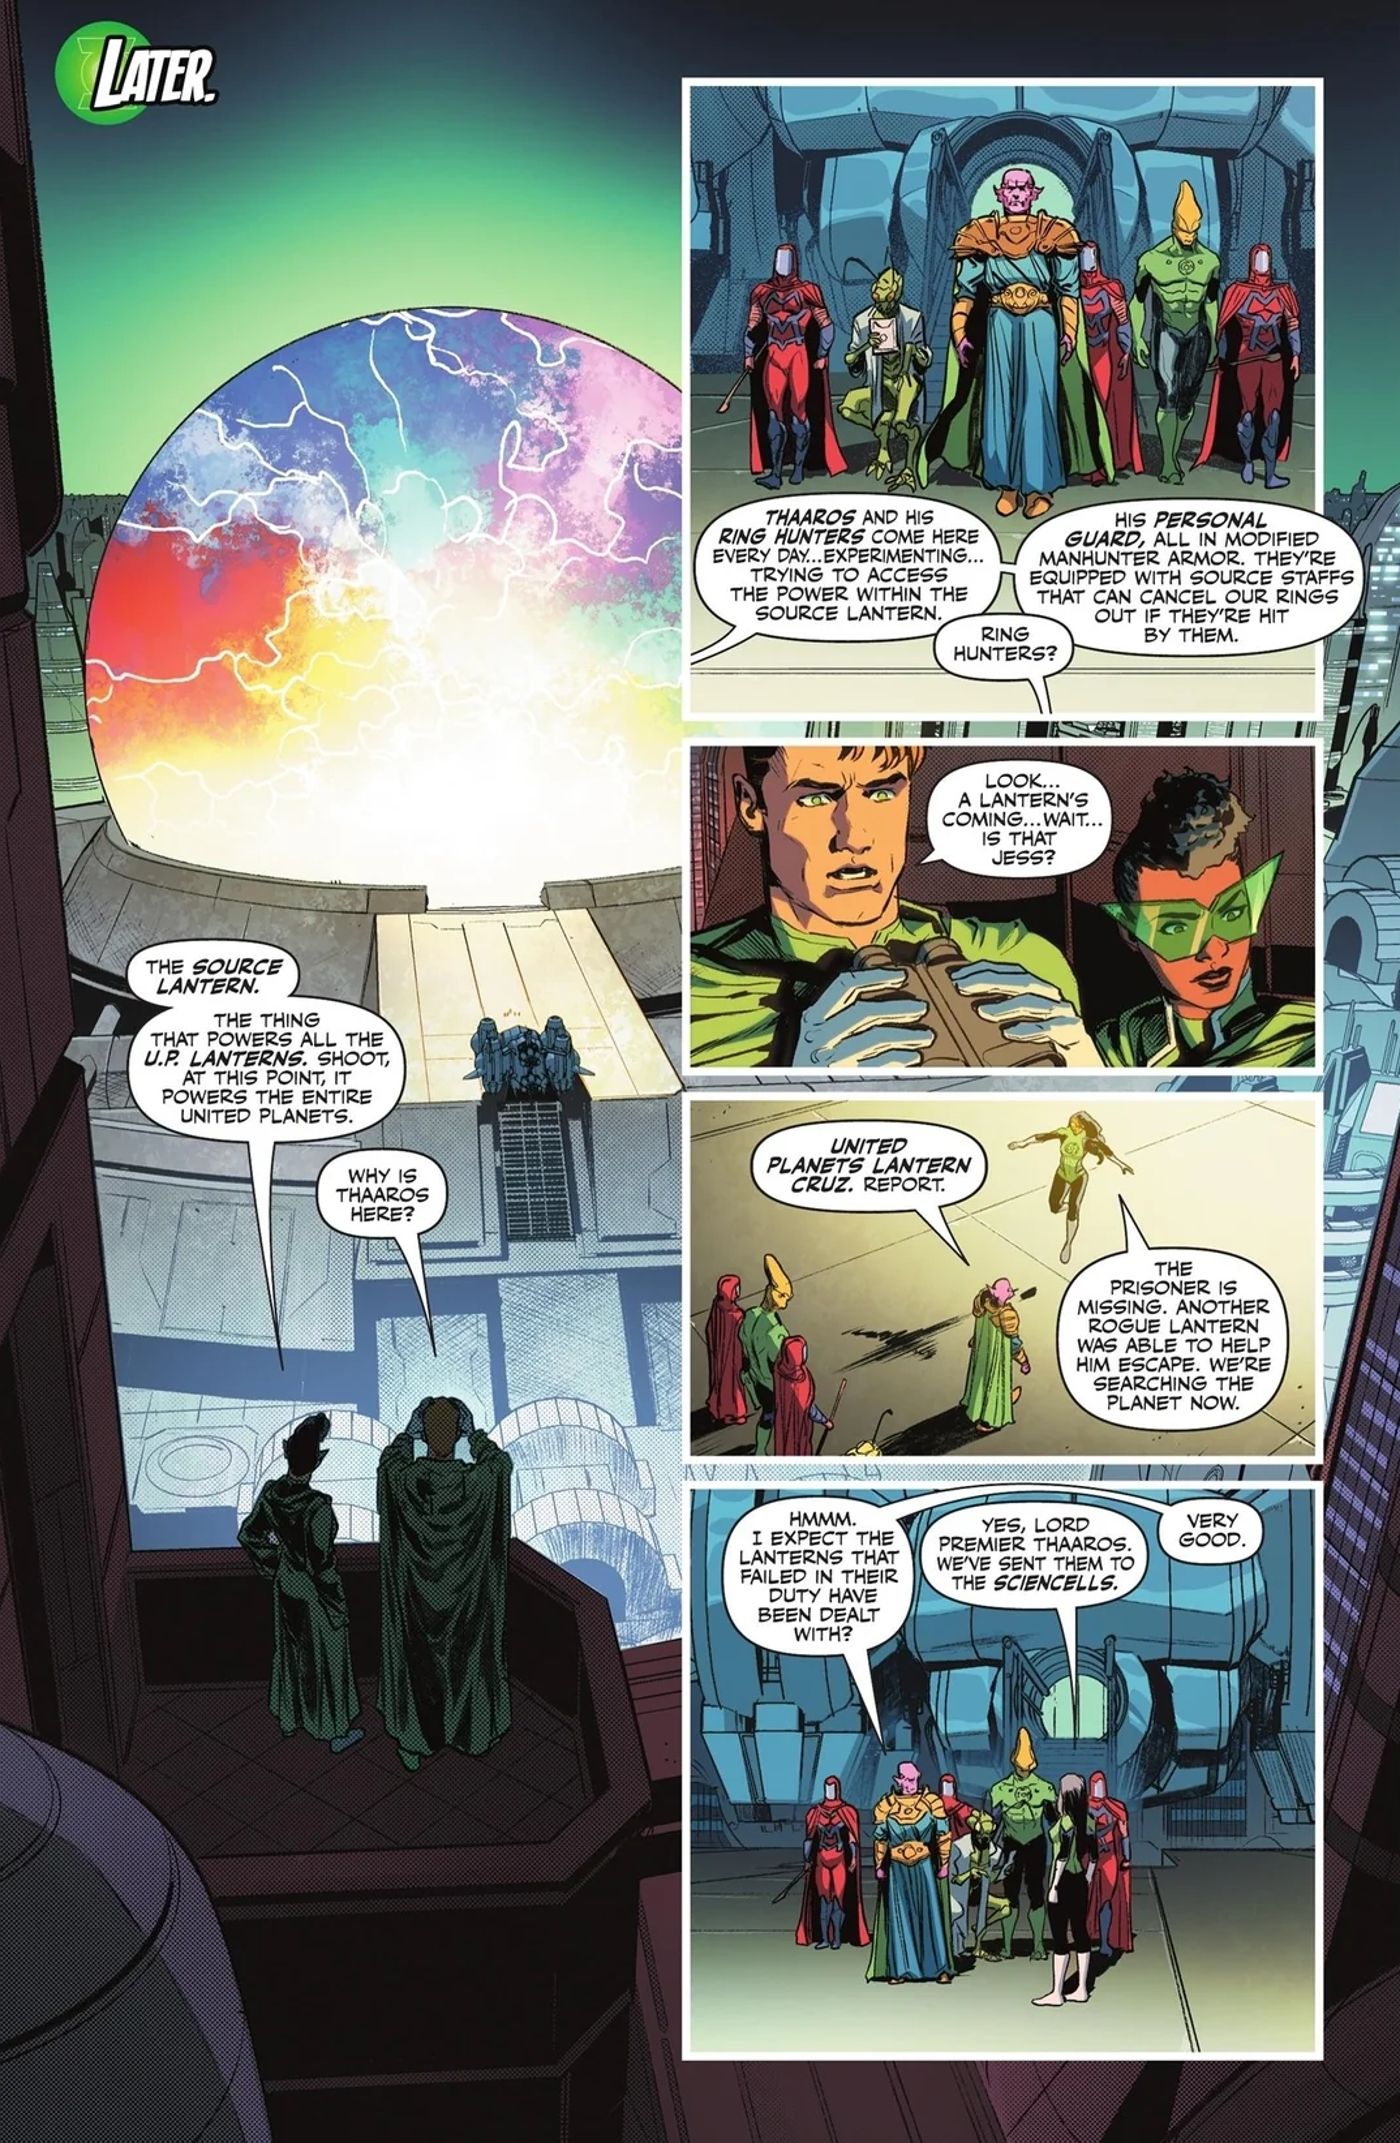 Green Lantern Faces the Sublime “Source Lantern,” DC’s Most Powerful Lantern Battery Ever